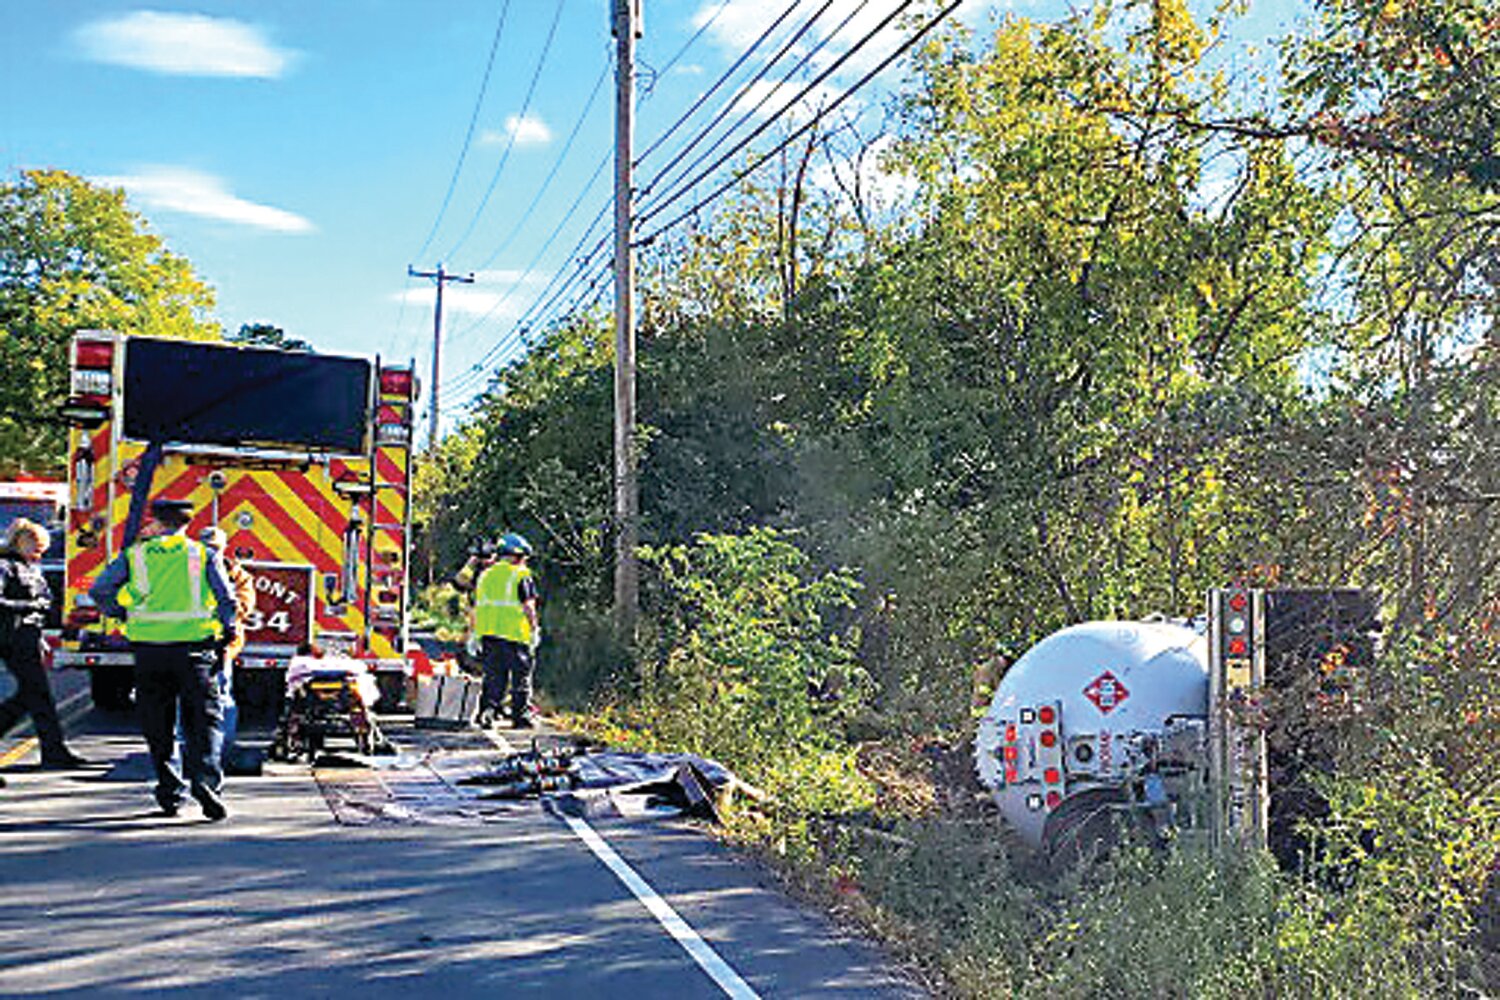 An accident involving a propane truck Monday prompted the closure of a section of Ferry Road in Doylestown Township and the evacuation of residents living within 2,000 feet of the wreck.